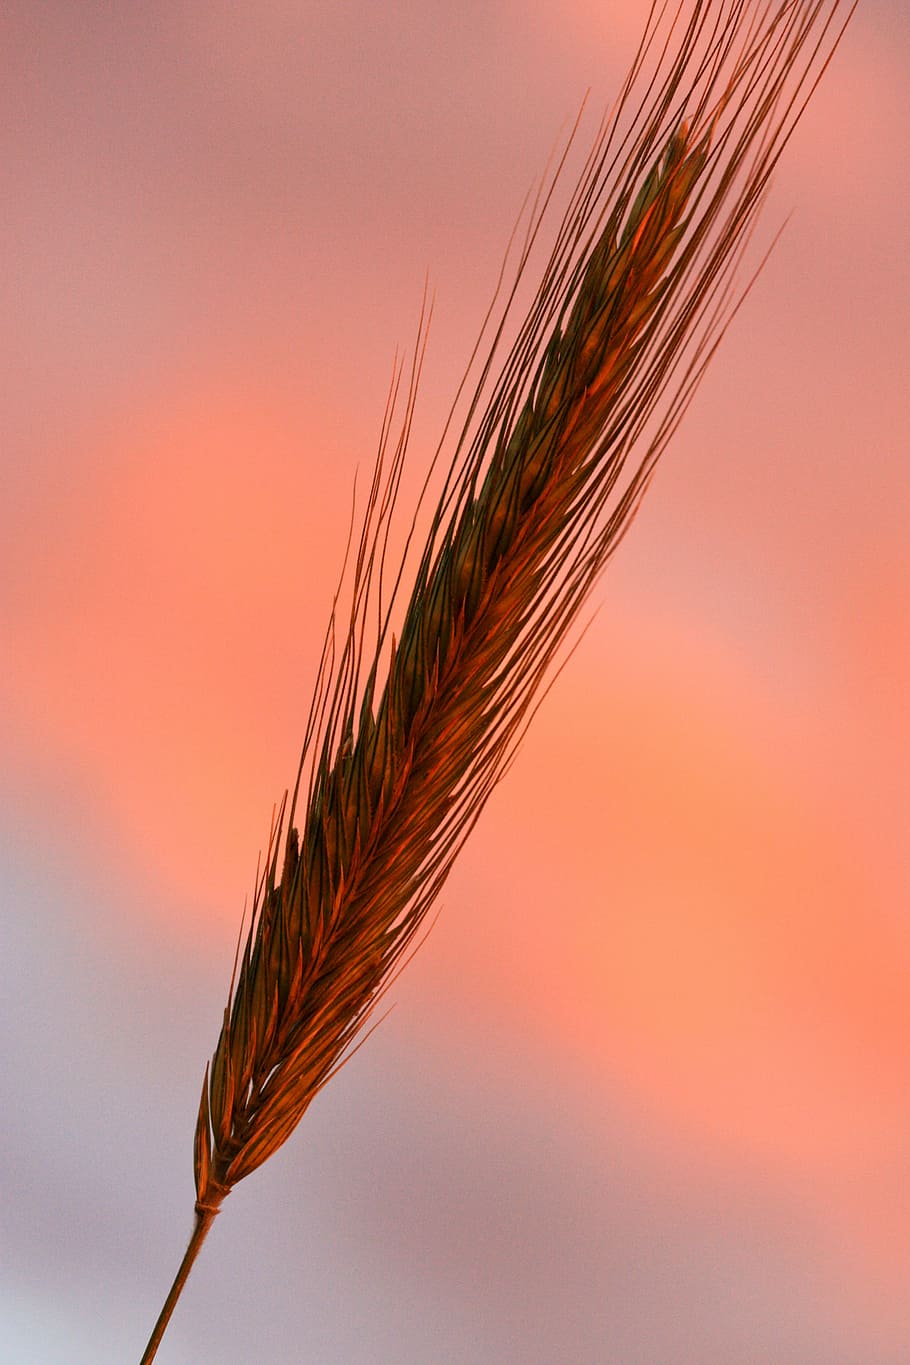 Rye, Sunset, Resilient, Crop, Landscape, farm, gold, field, cereal plant, wheat